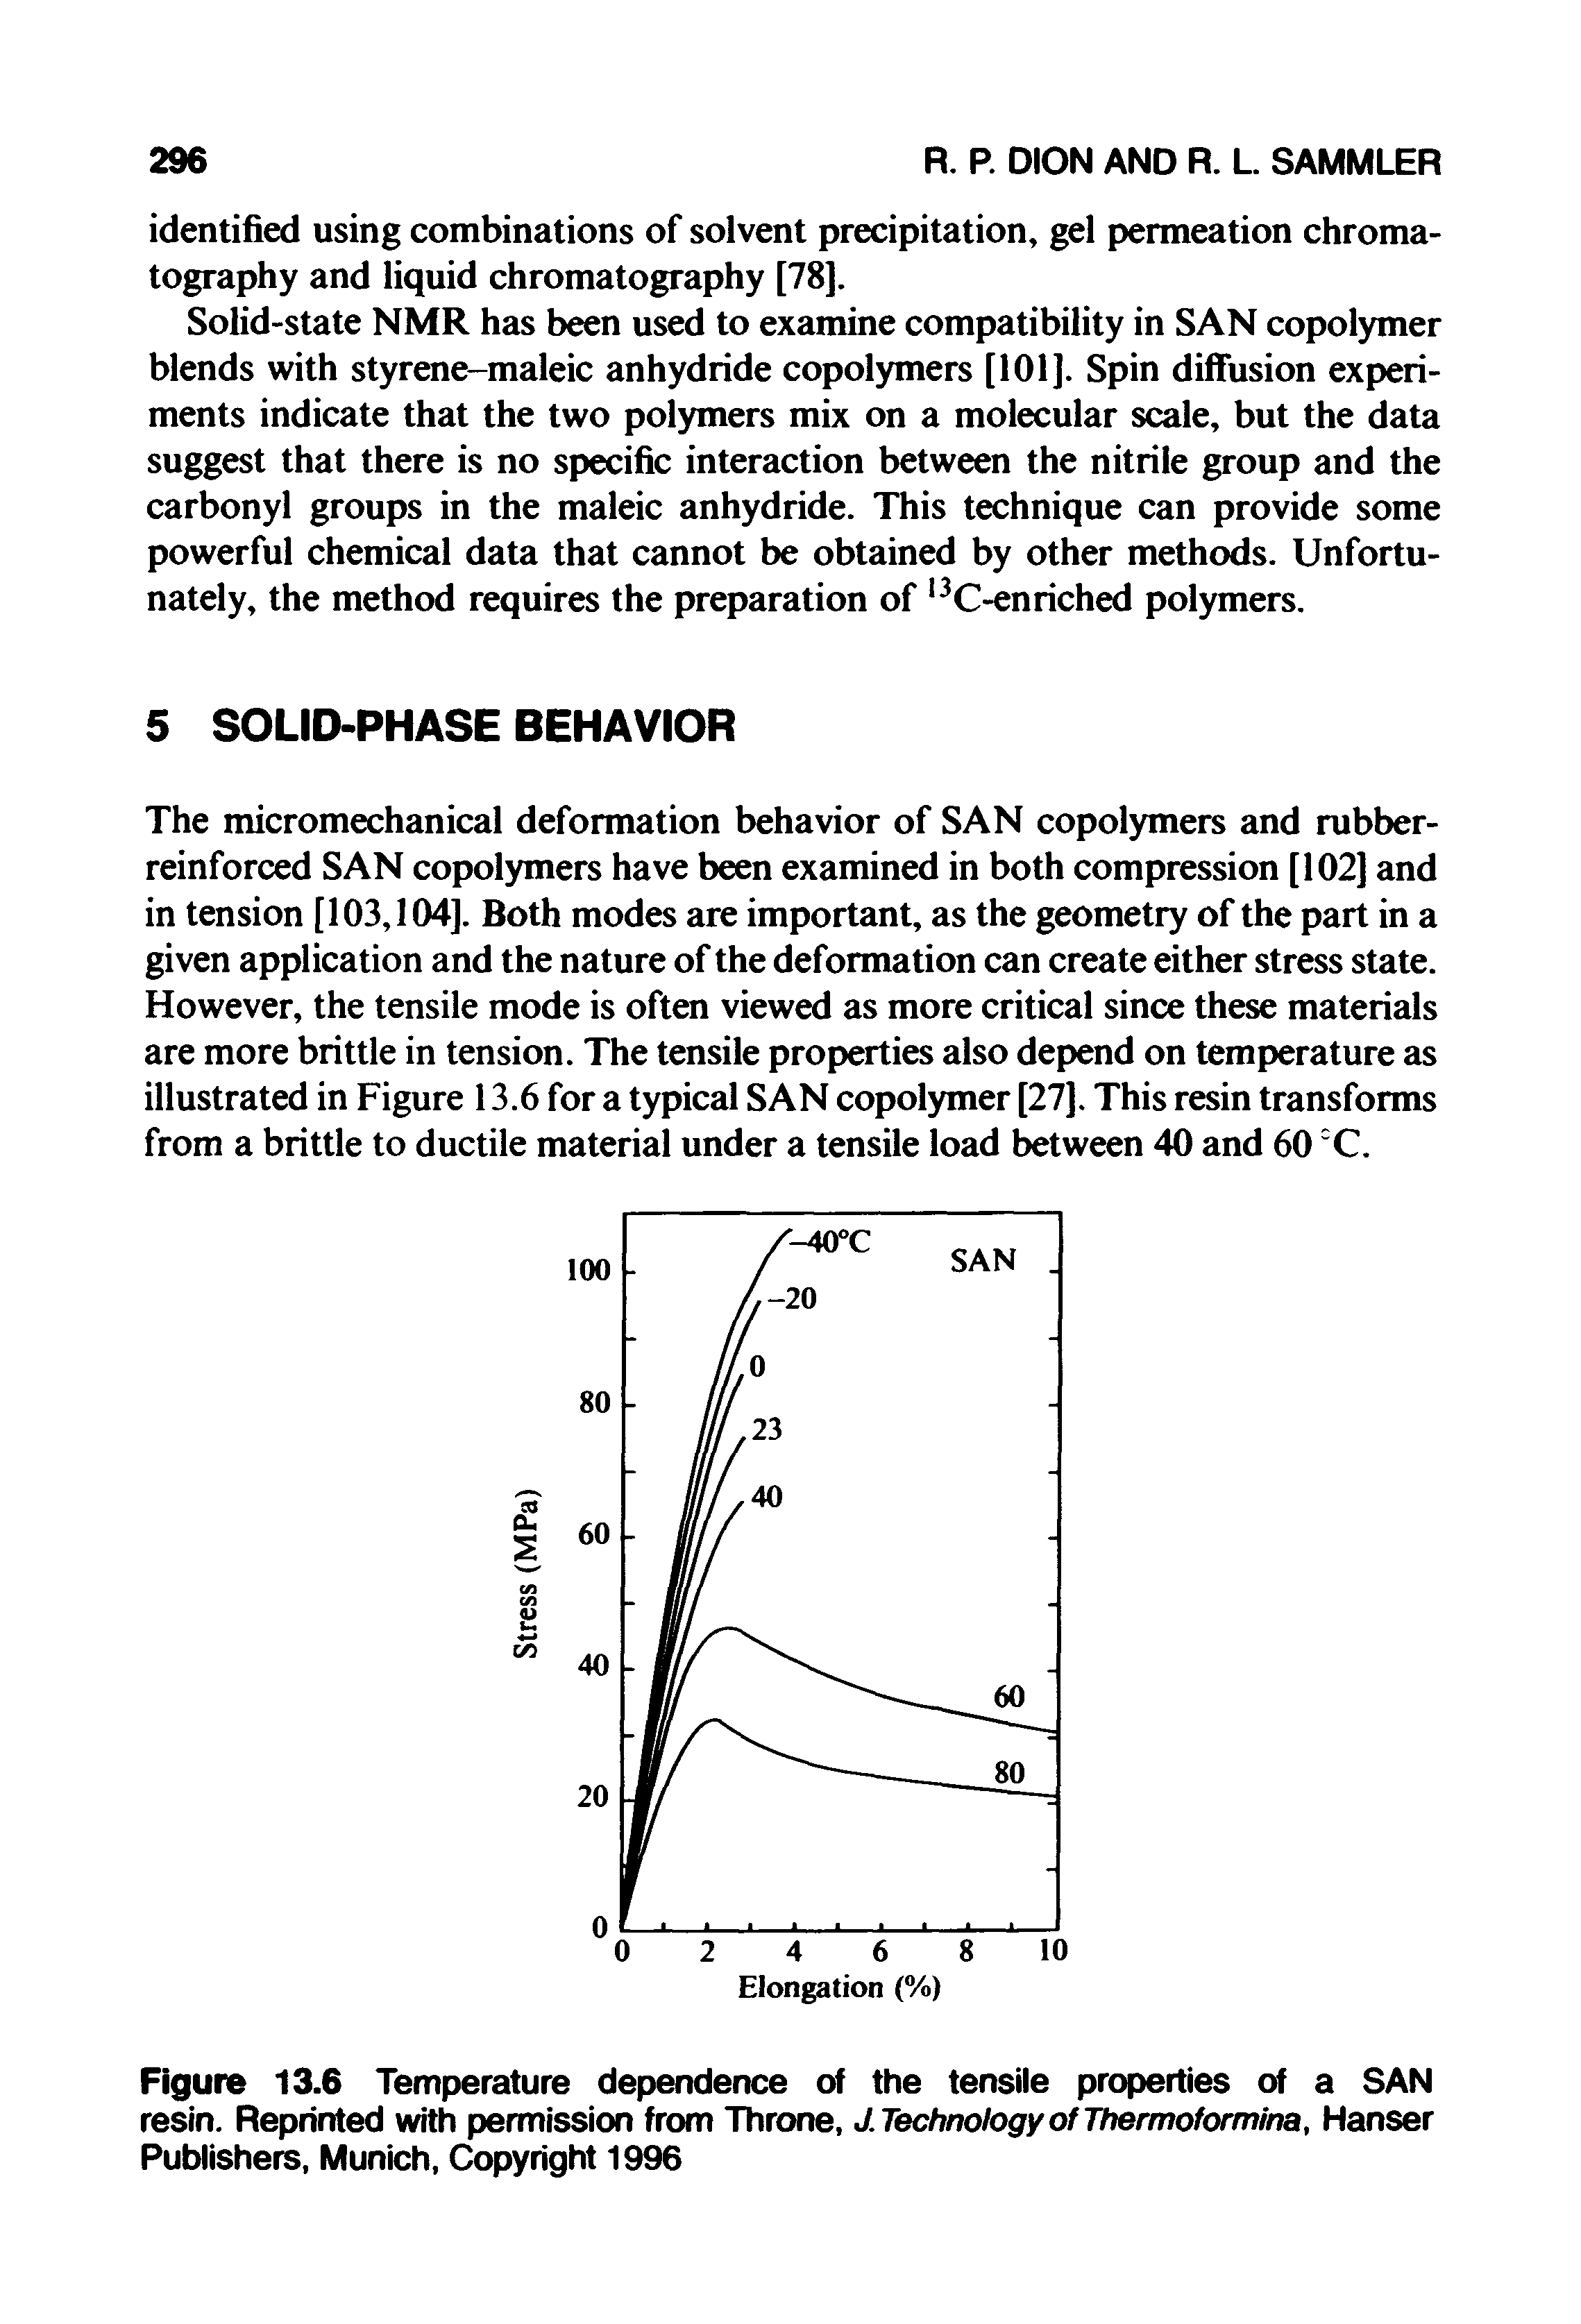 Figure 13.6 Temperature dependence of the tensile properties of a SAN resin. Reprinted with permission from Throne, J.TechnologyofThermoformina, Hanser Publishers, Munich, Copyright 1996...